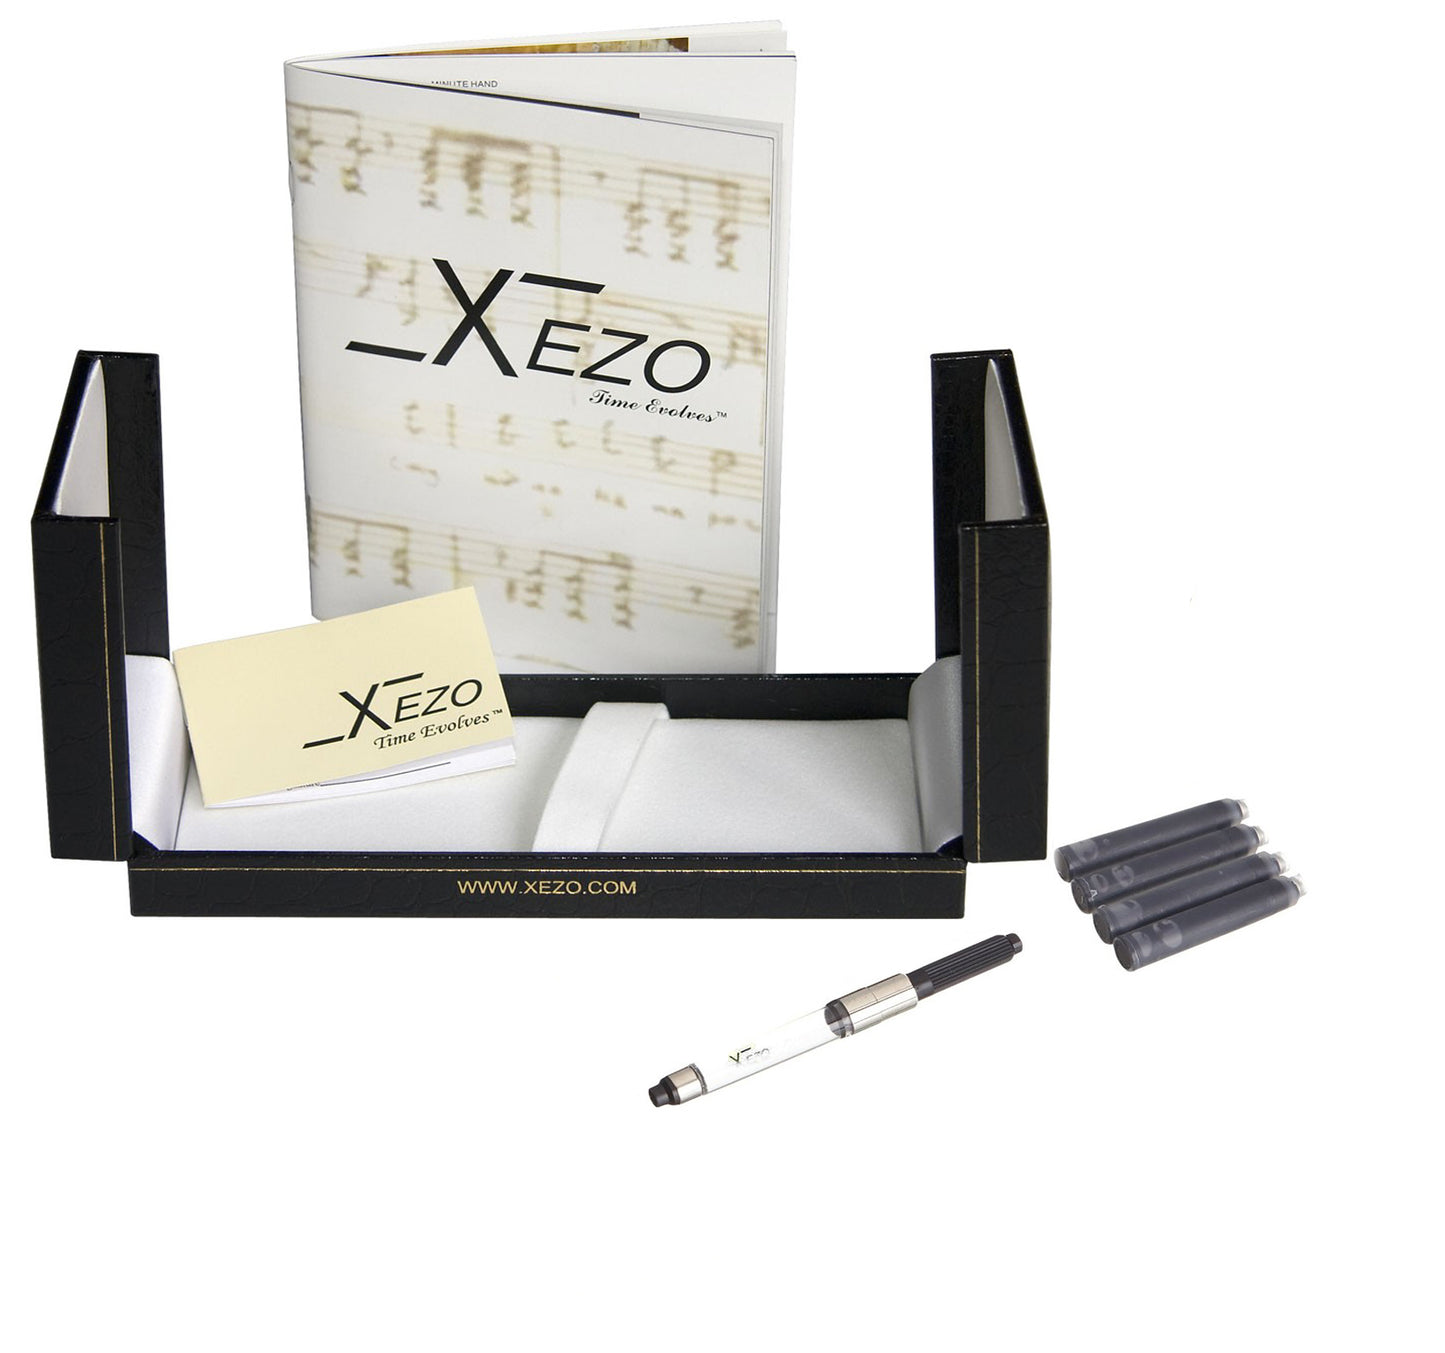 Xezo - Black gift box, certificate, manual, chrome-plated ink converter, and four ink cartridges of the Urbanite Red FM fountain pen